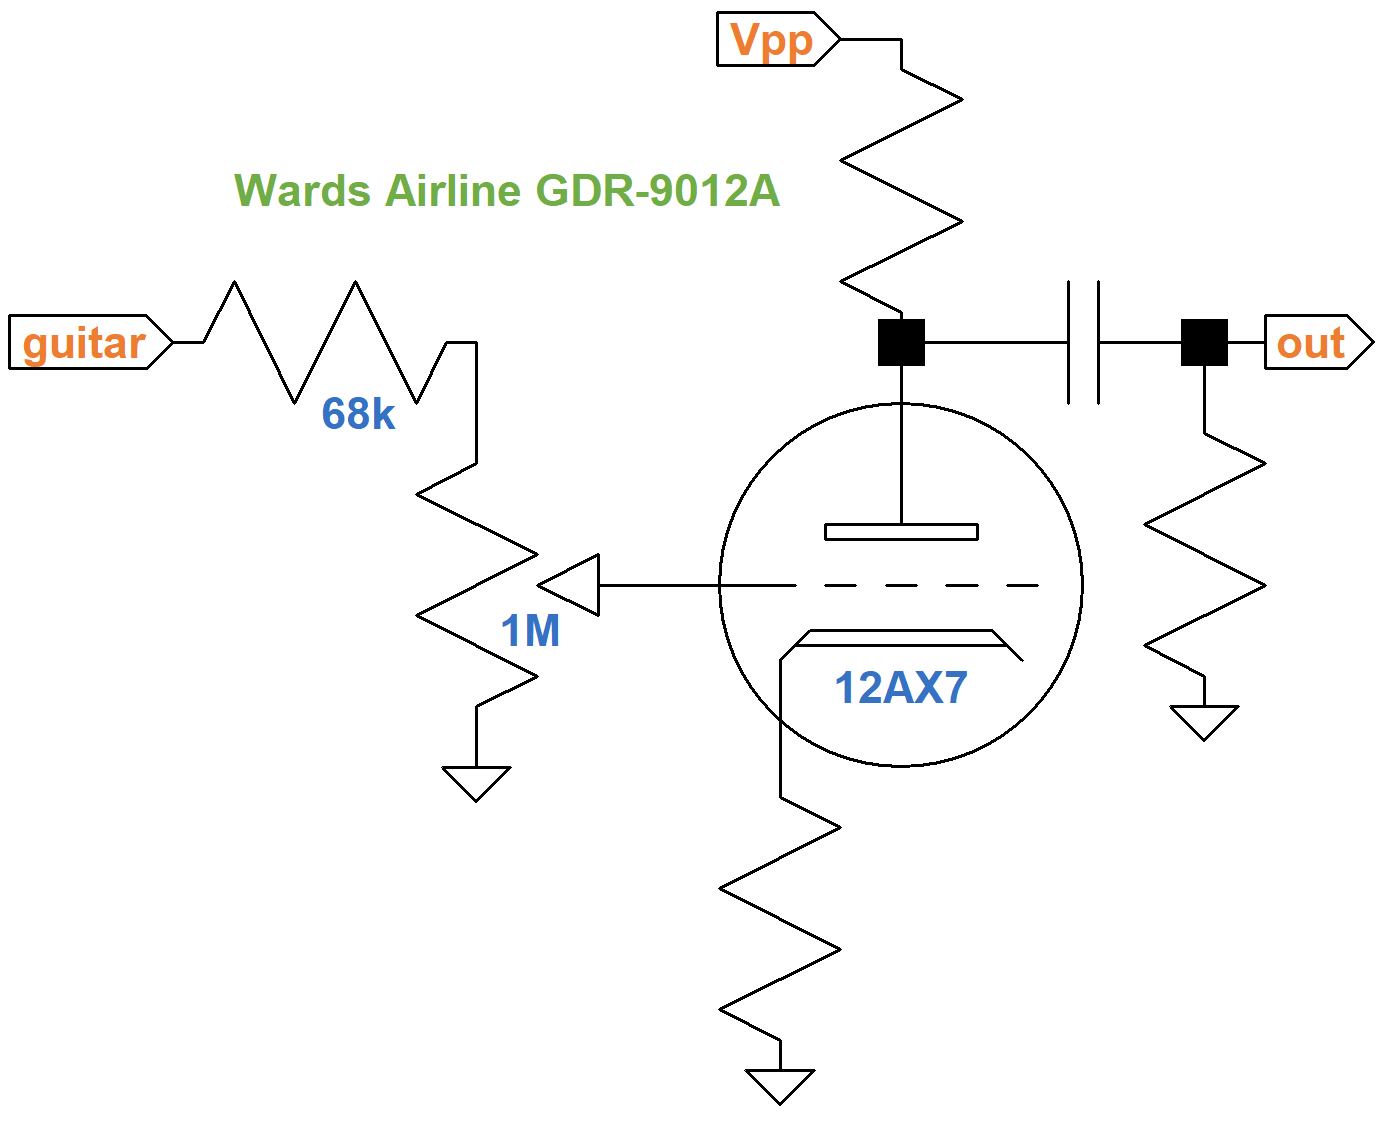 Wards Airline GDR-9012A